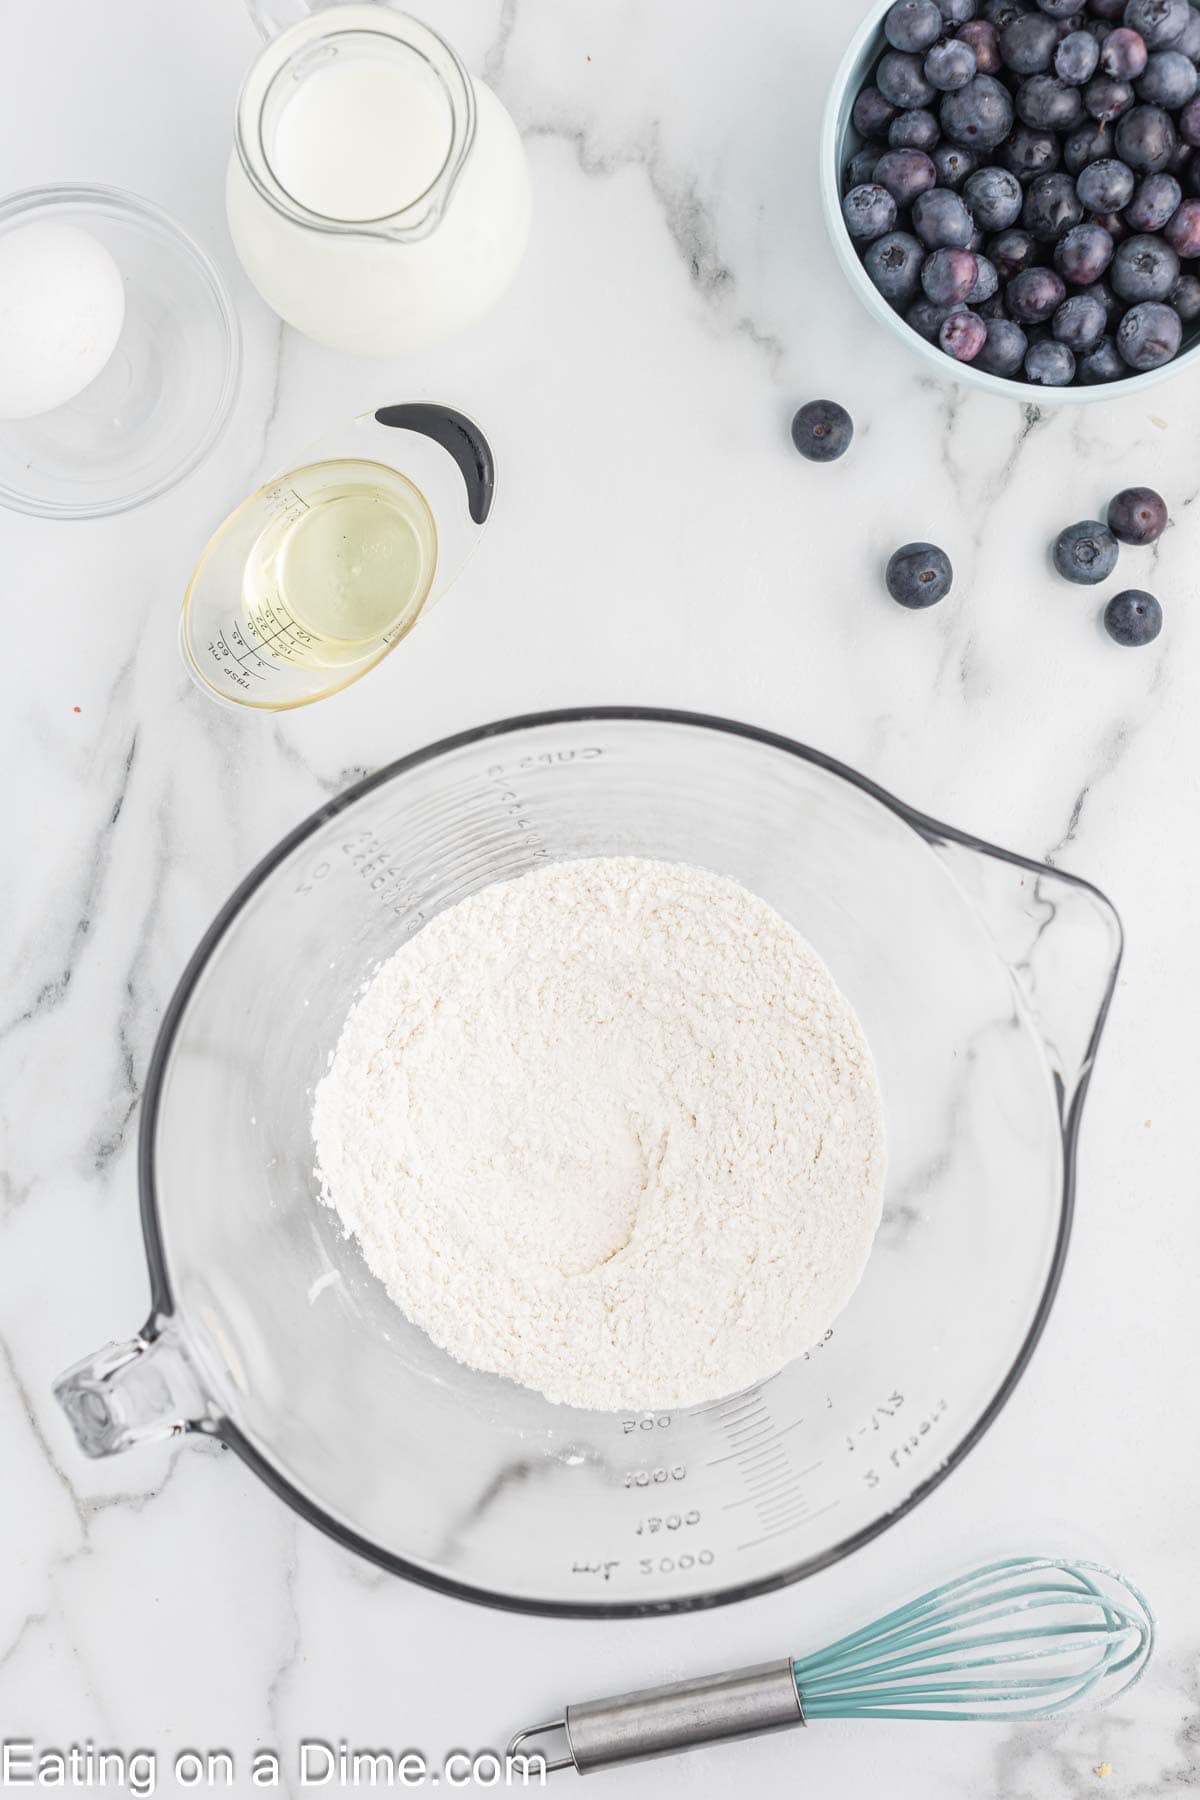 Placing the flour, salt and baking powder in a large measuring cup bowl. A blow of blueberries, oil and milk on the side